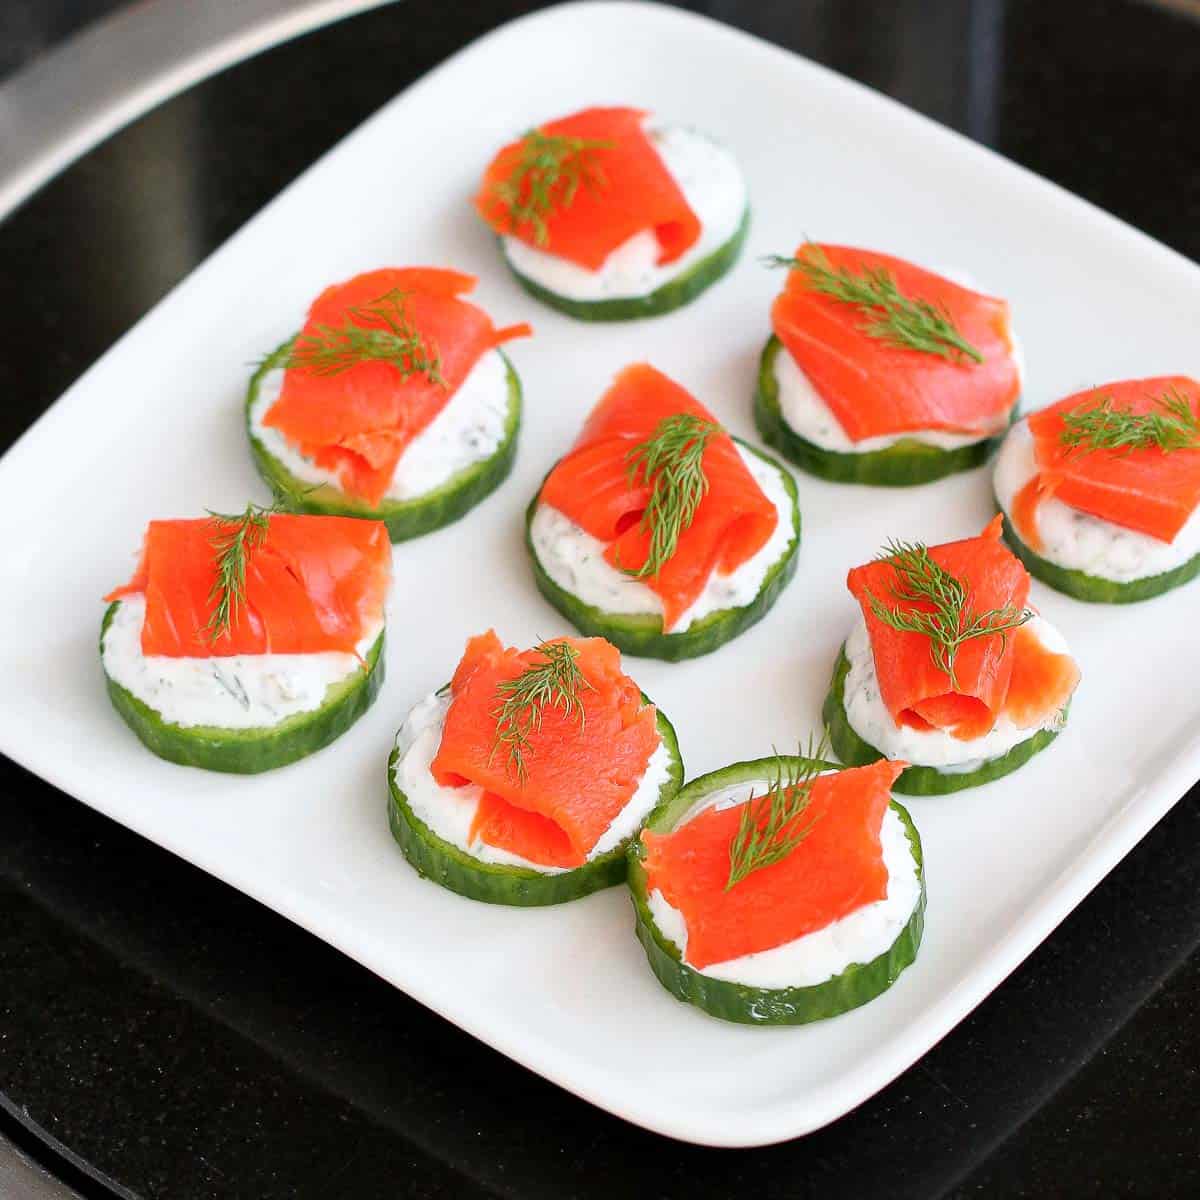 Smoked salmon and cucumber appetizers on a white plate.